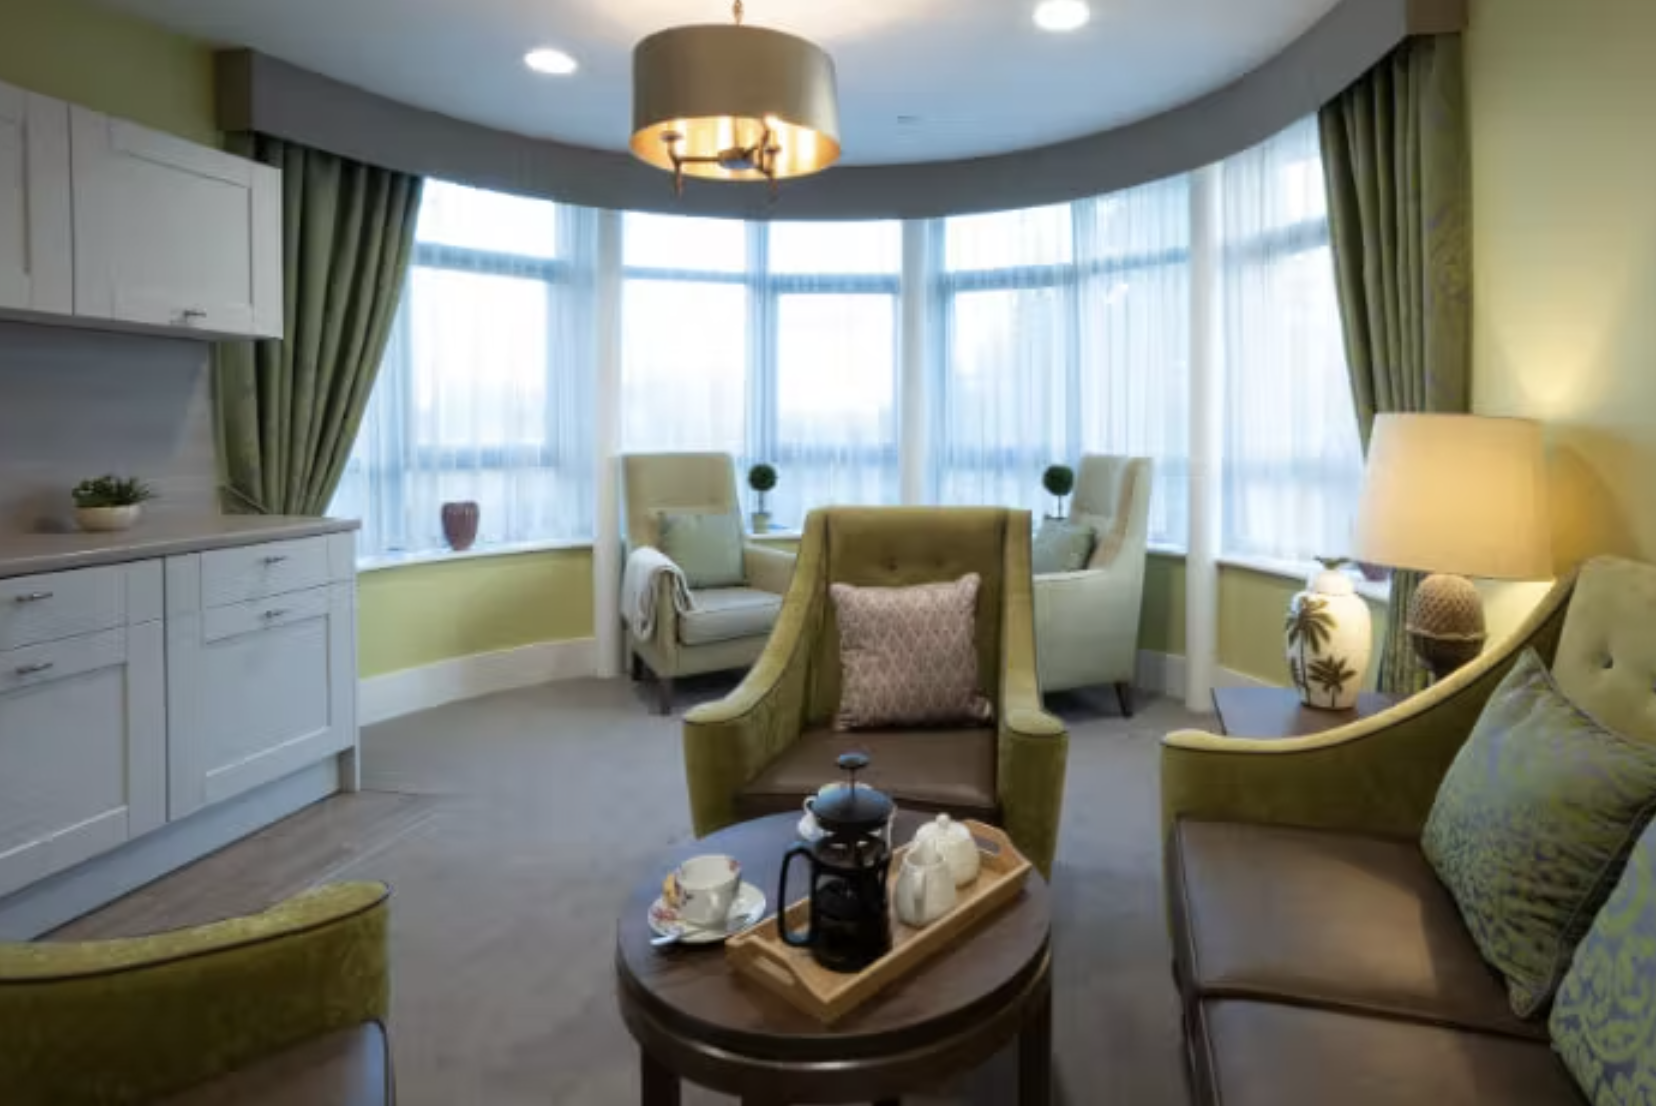 Independent Care Home - Valerian Court care home 6